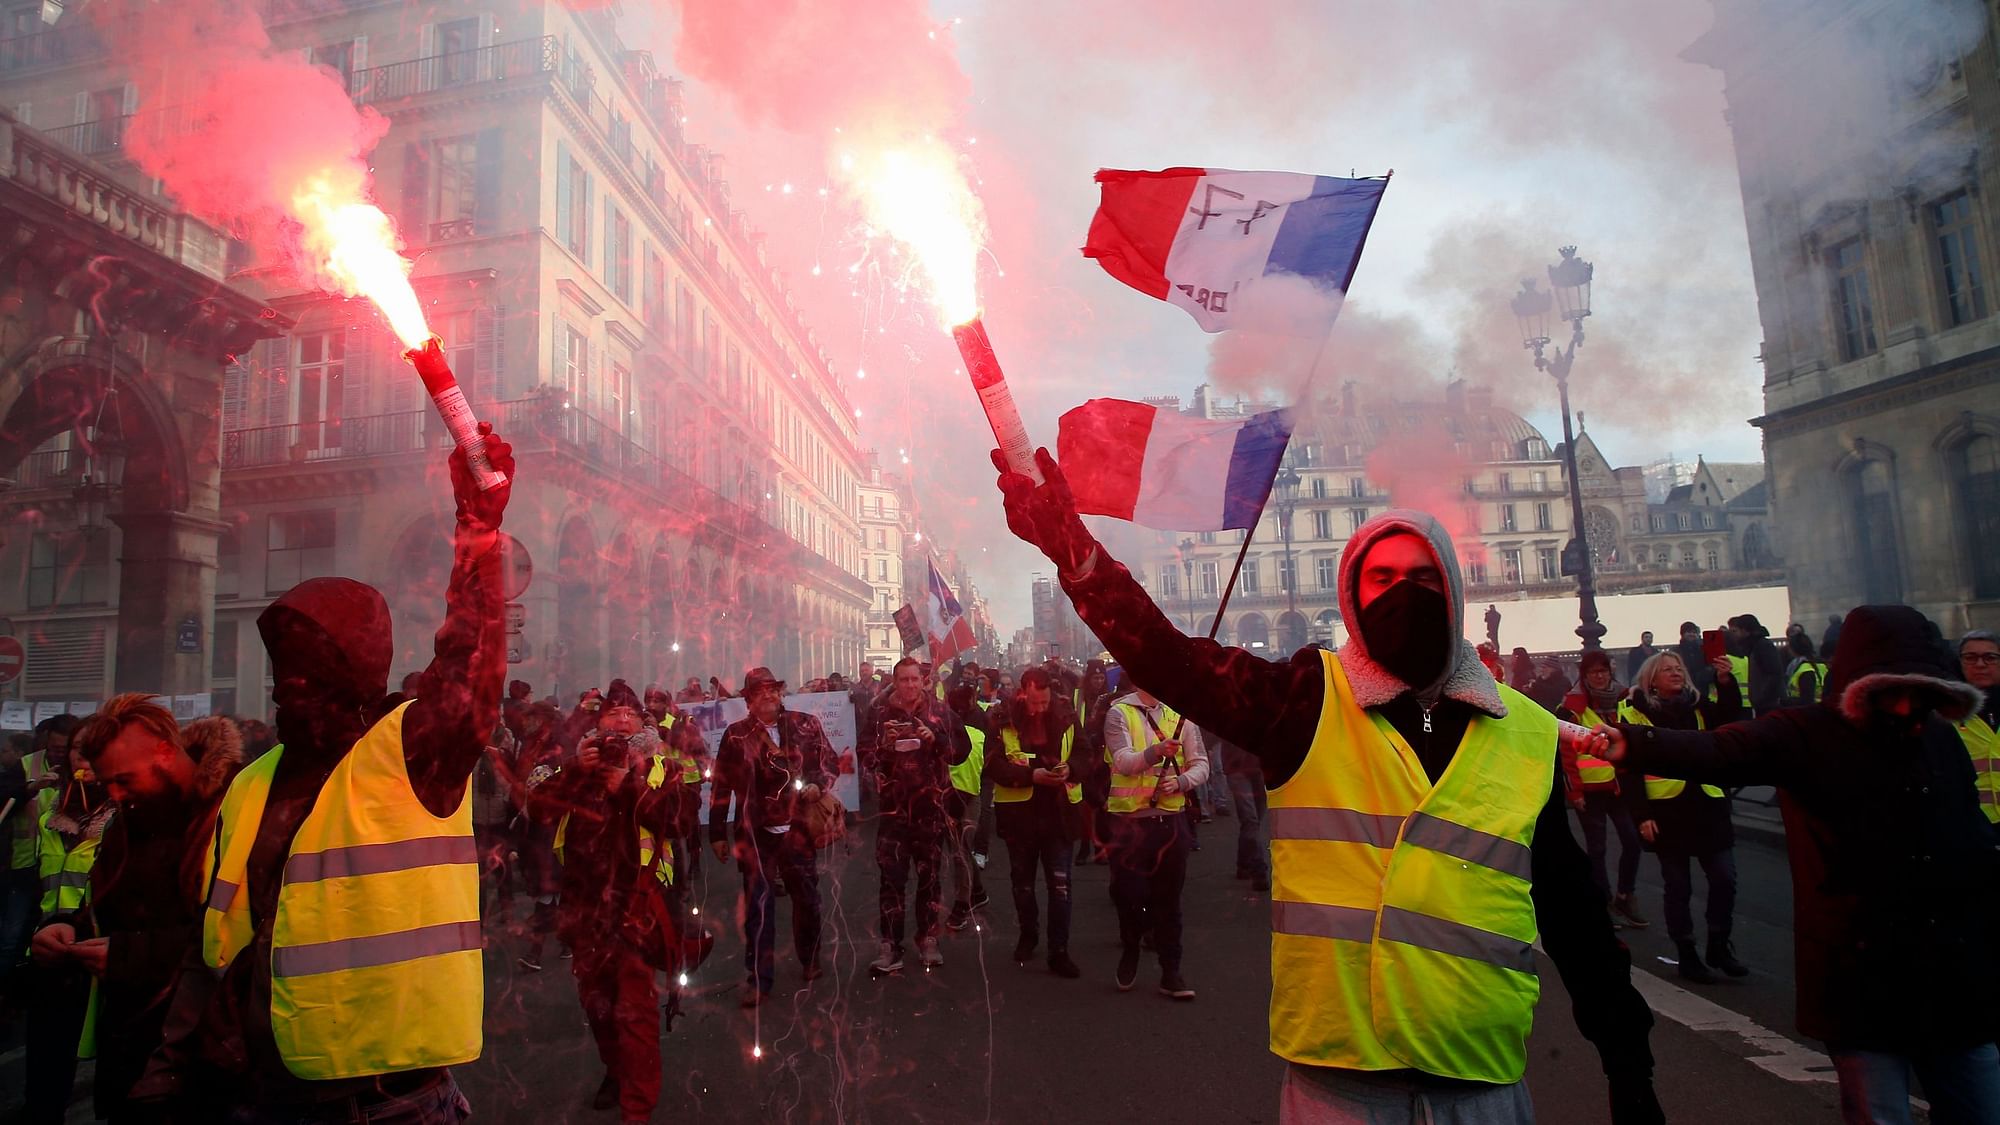 France is recalling its ambassador to Italy amid mounting tensions after Italy’s deputy prime minister met with French yellow vest protesters.&nbsp;